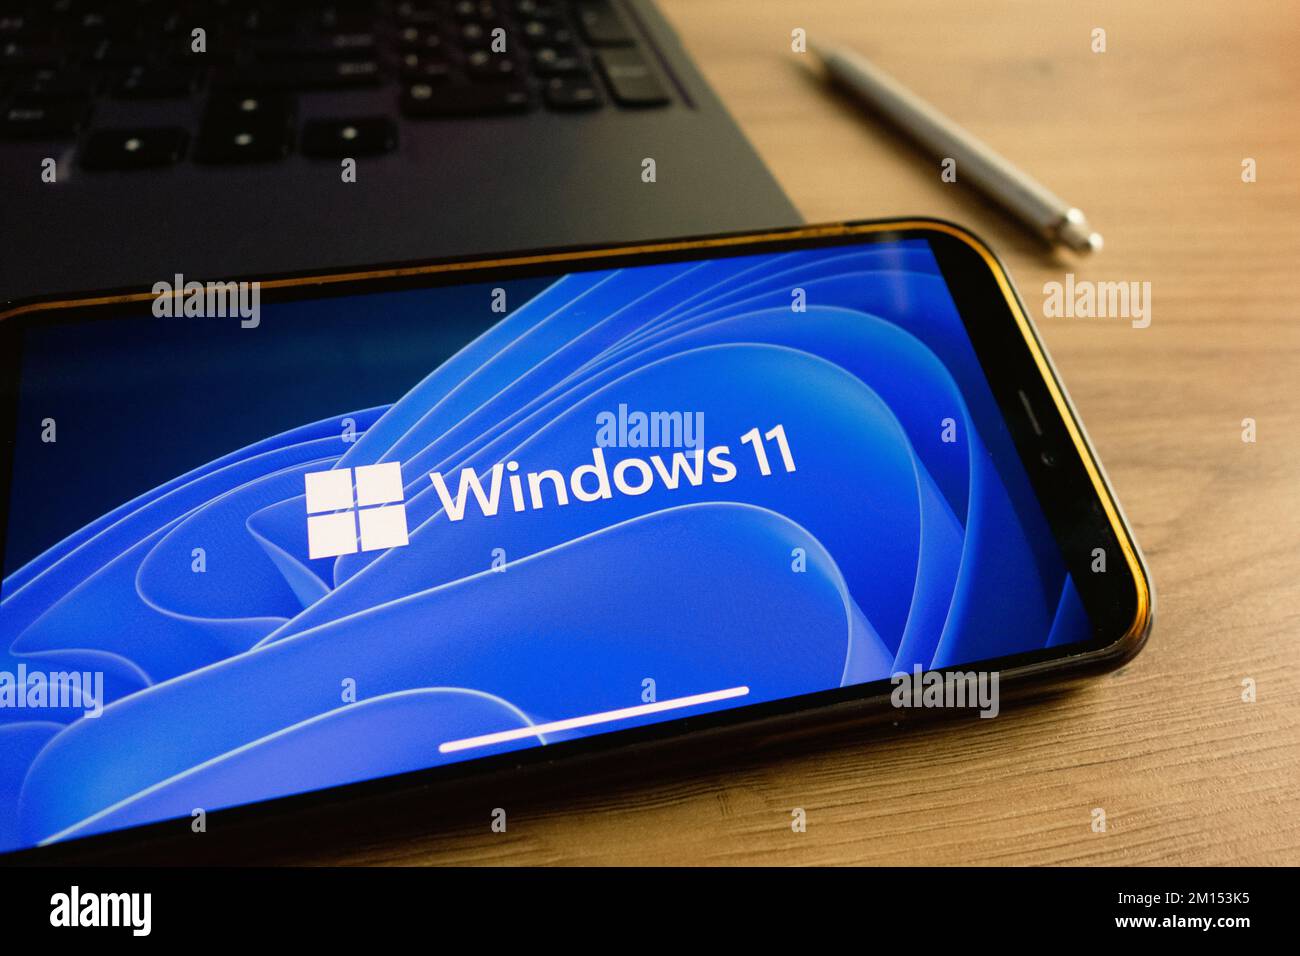 KONSKIE, POLAND - September 17, 2022: Windows 11 logo displayed on smartphone screen in the office. Windows 11 is the latest major release of Microsof Stock Photo